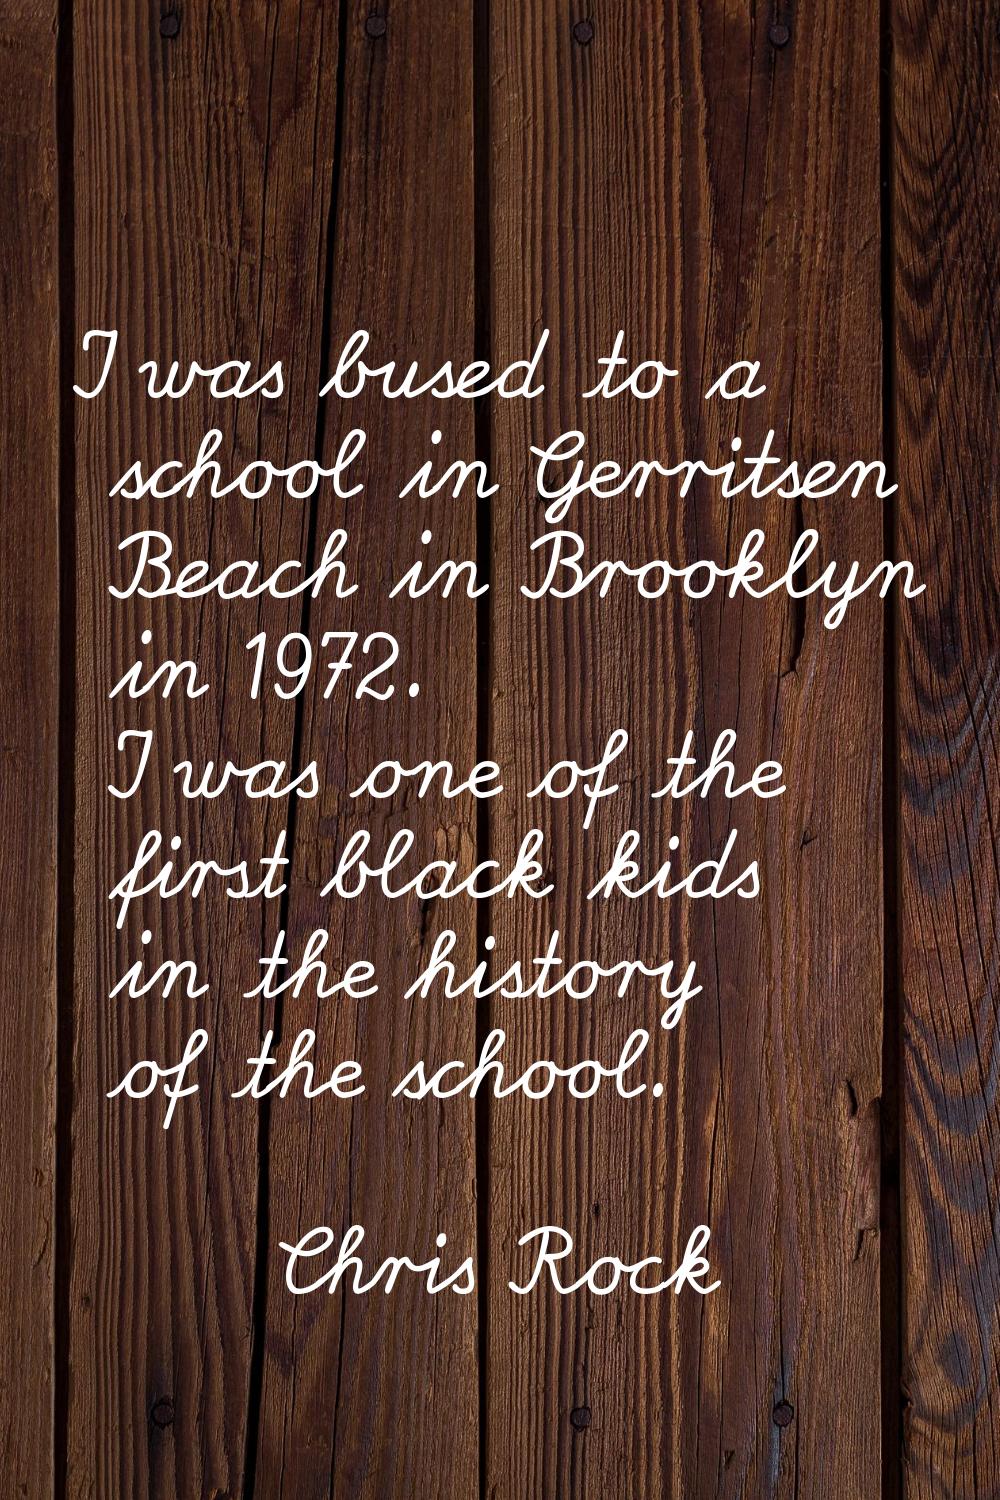 I was bused to a school in Gerritsen Beach in Brooklyn in 1972. I was one of the first black kids i